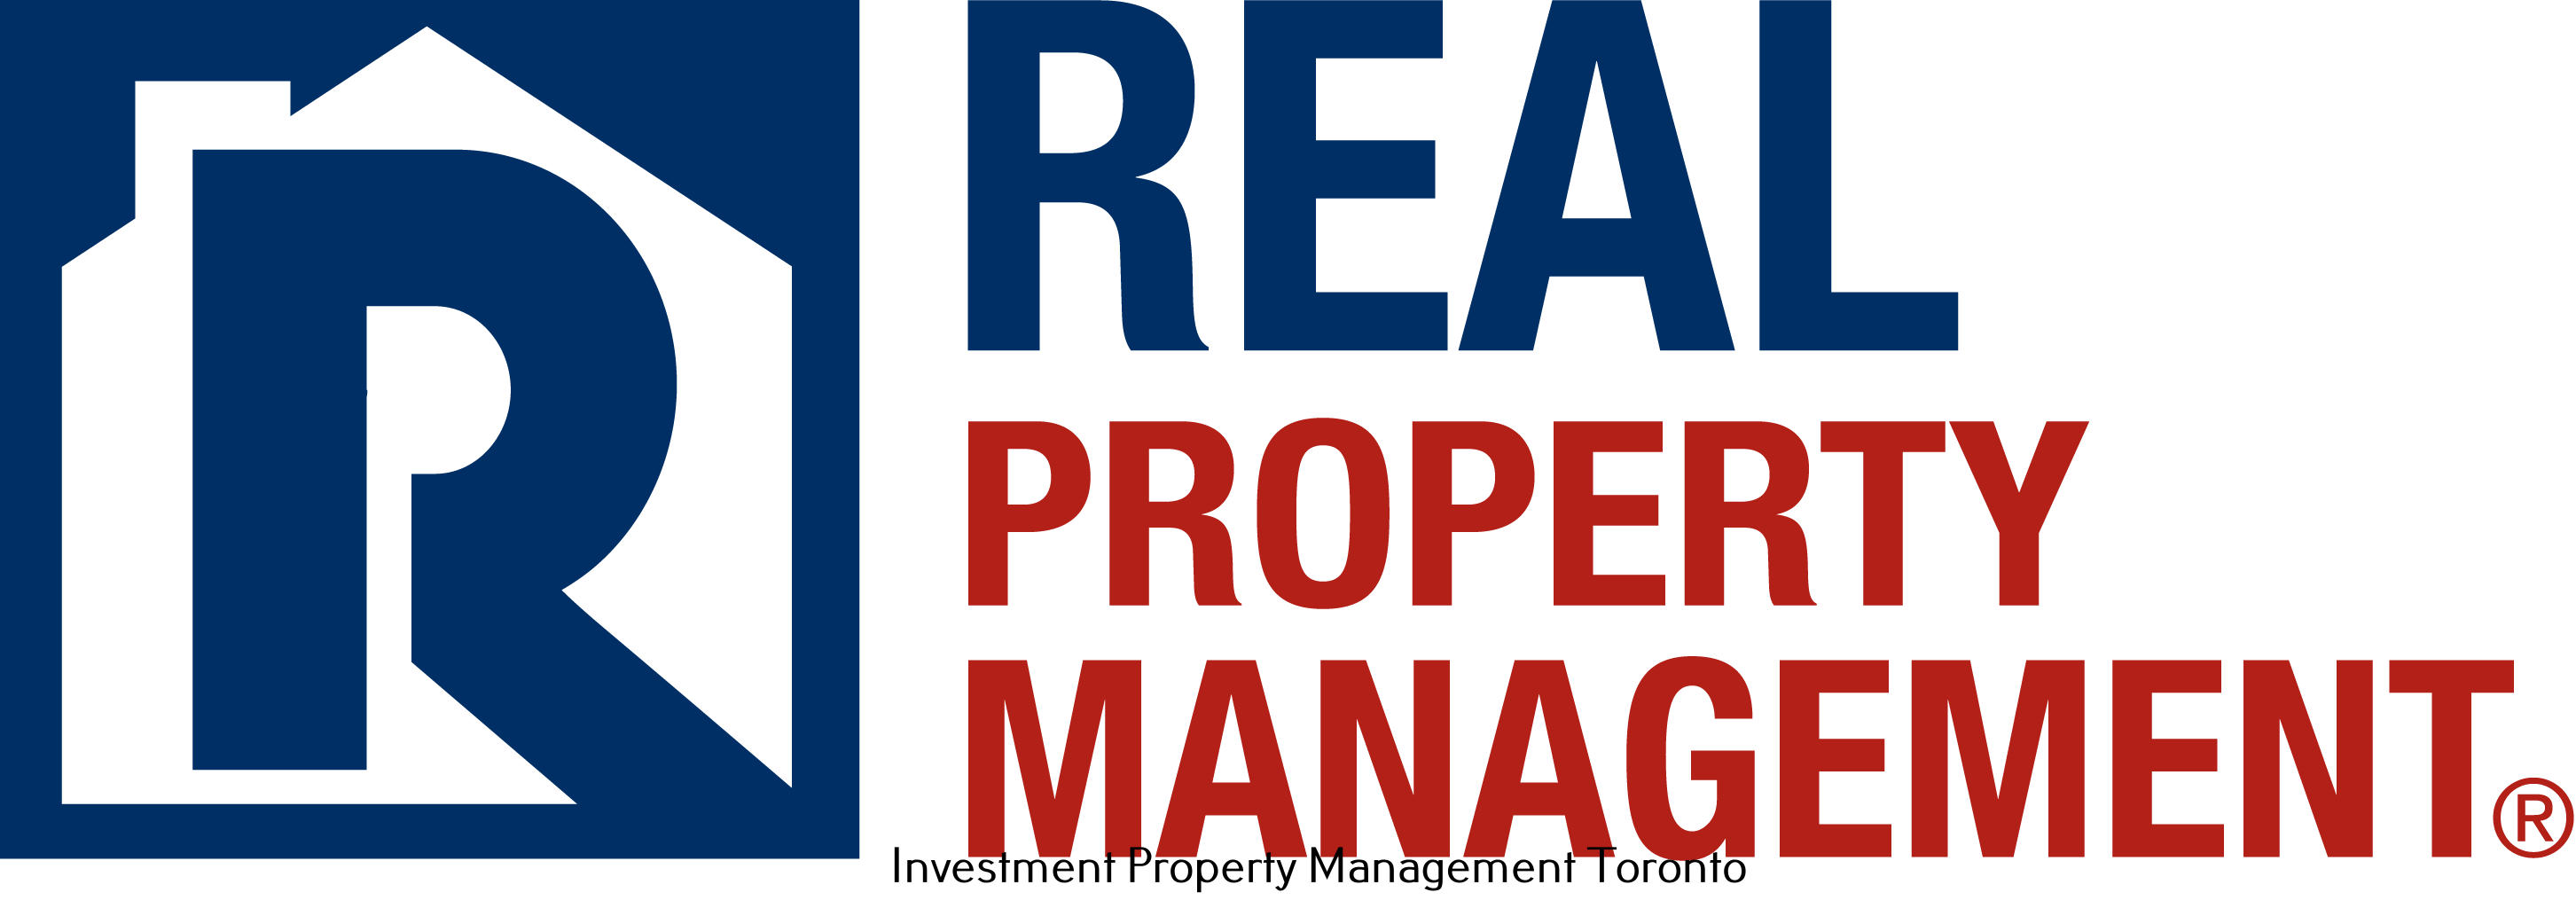 Real Property Management Service Shares How Technology Enhances Efficiency in Property Investment Management